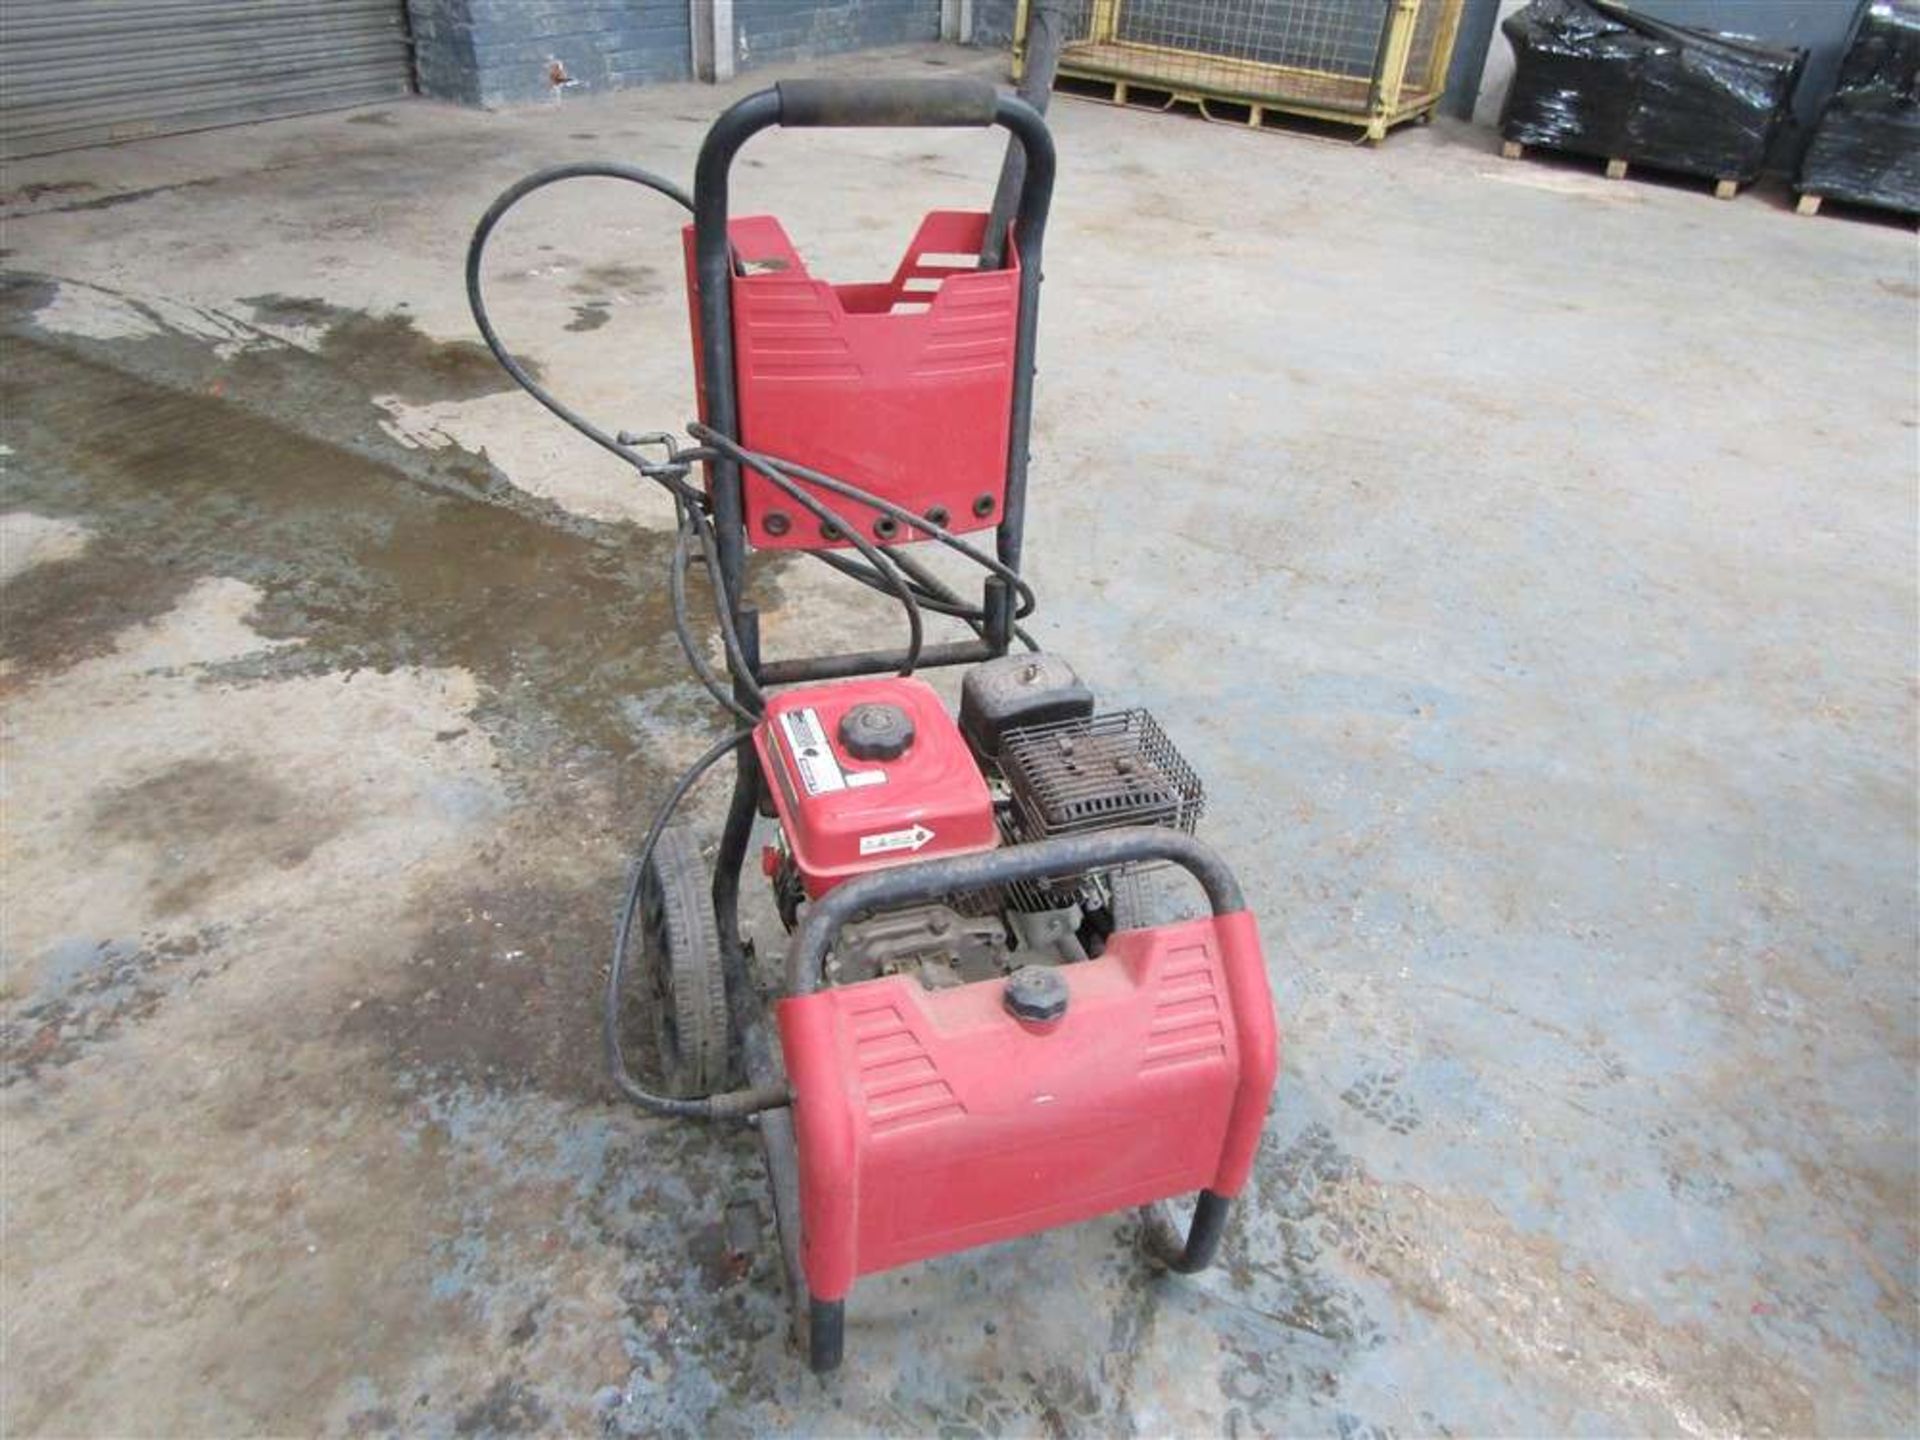 3000 psi Petrol Pressure Washer c/w Lance And Hose